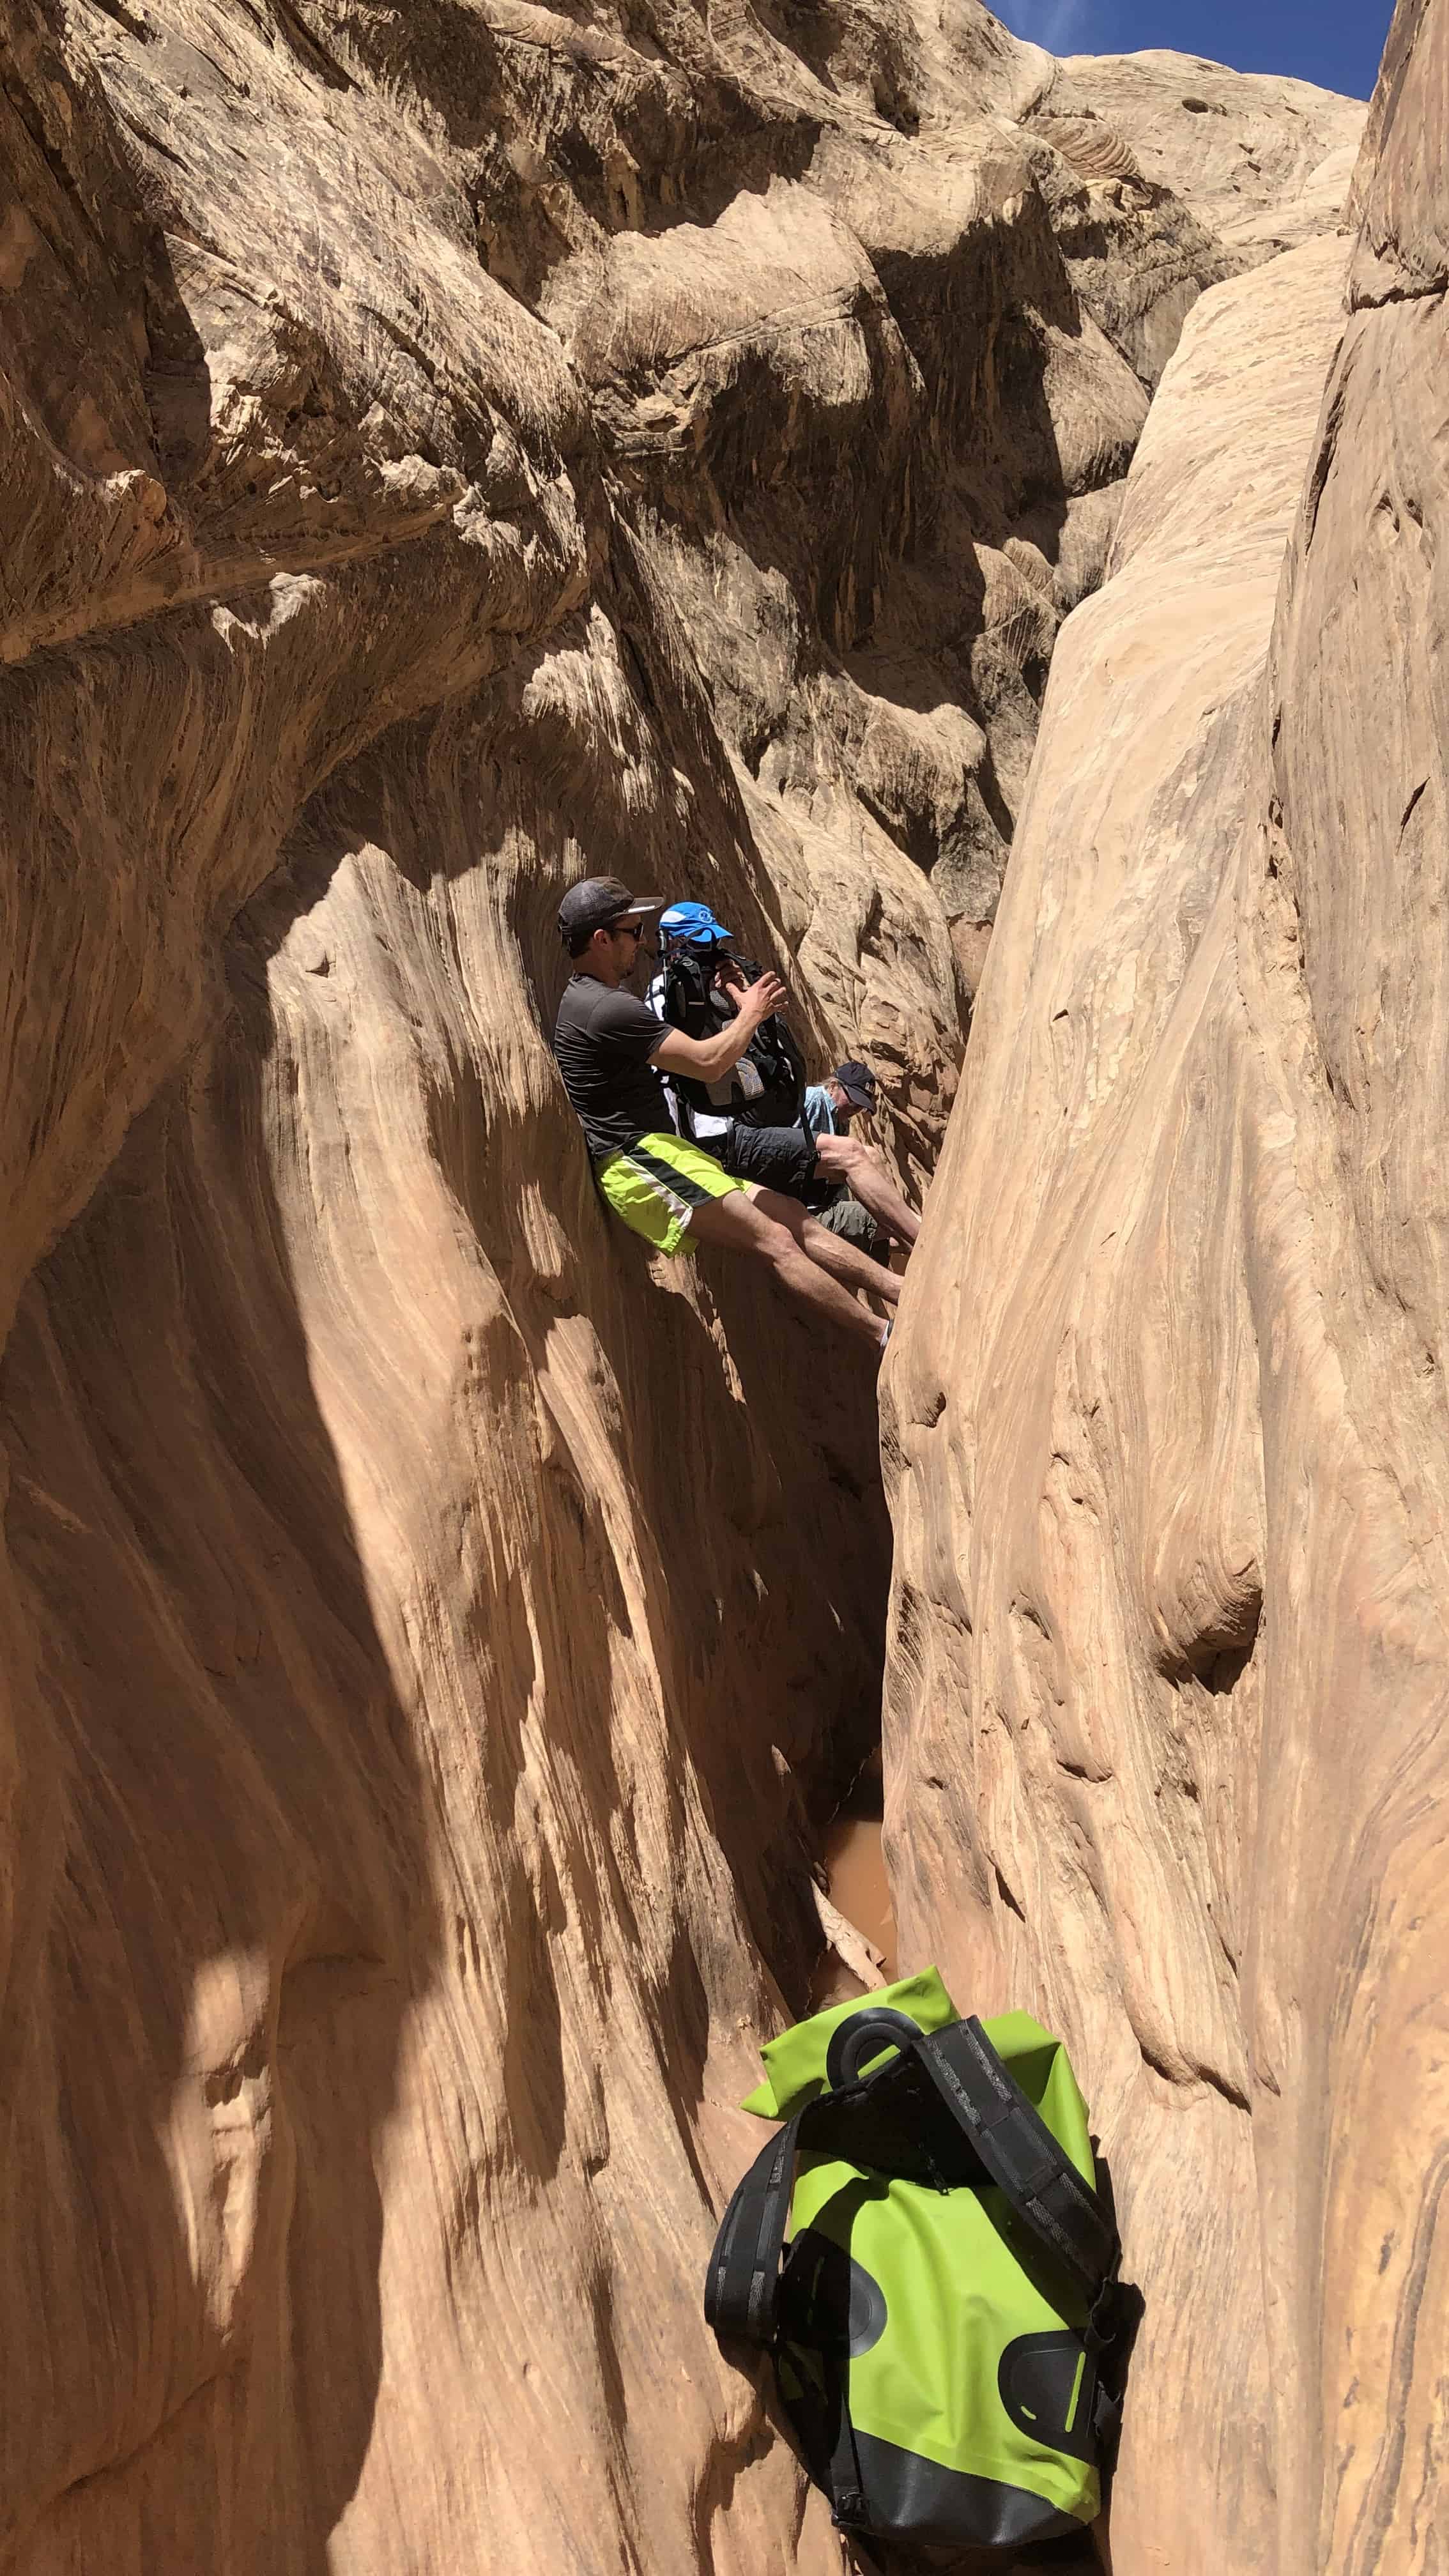 My son stemming in the slot canyon somewhere in the San Rafael Swell.